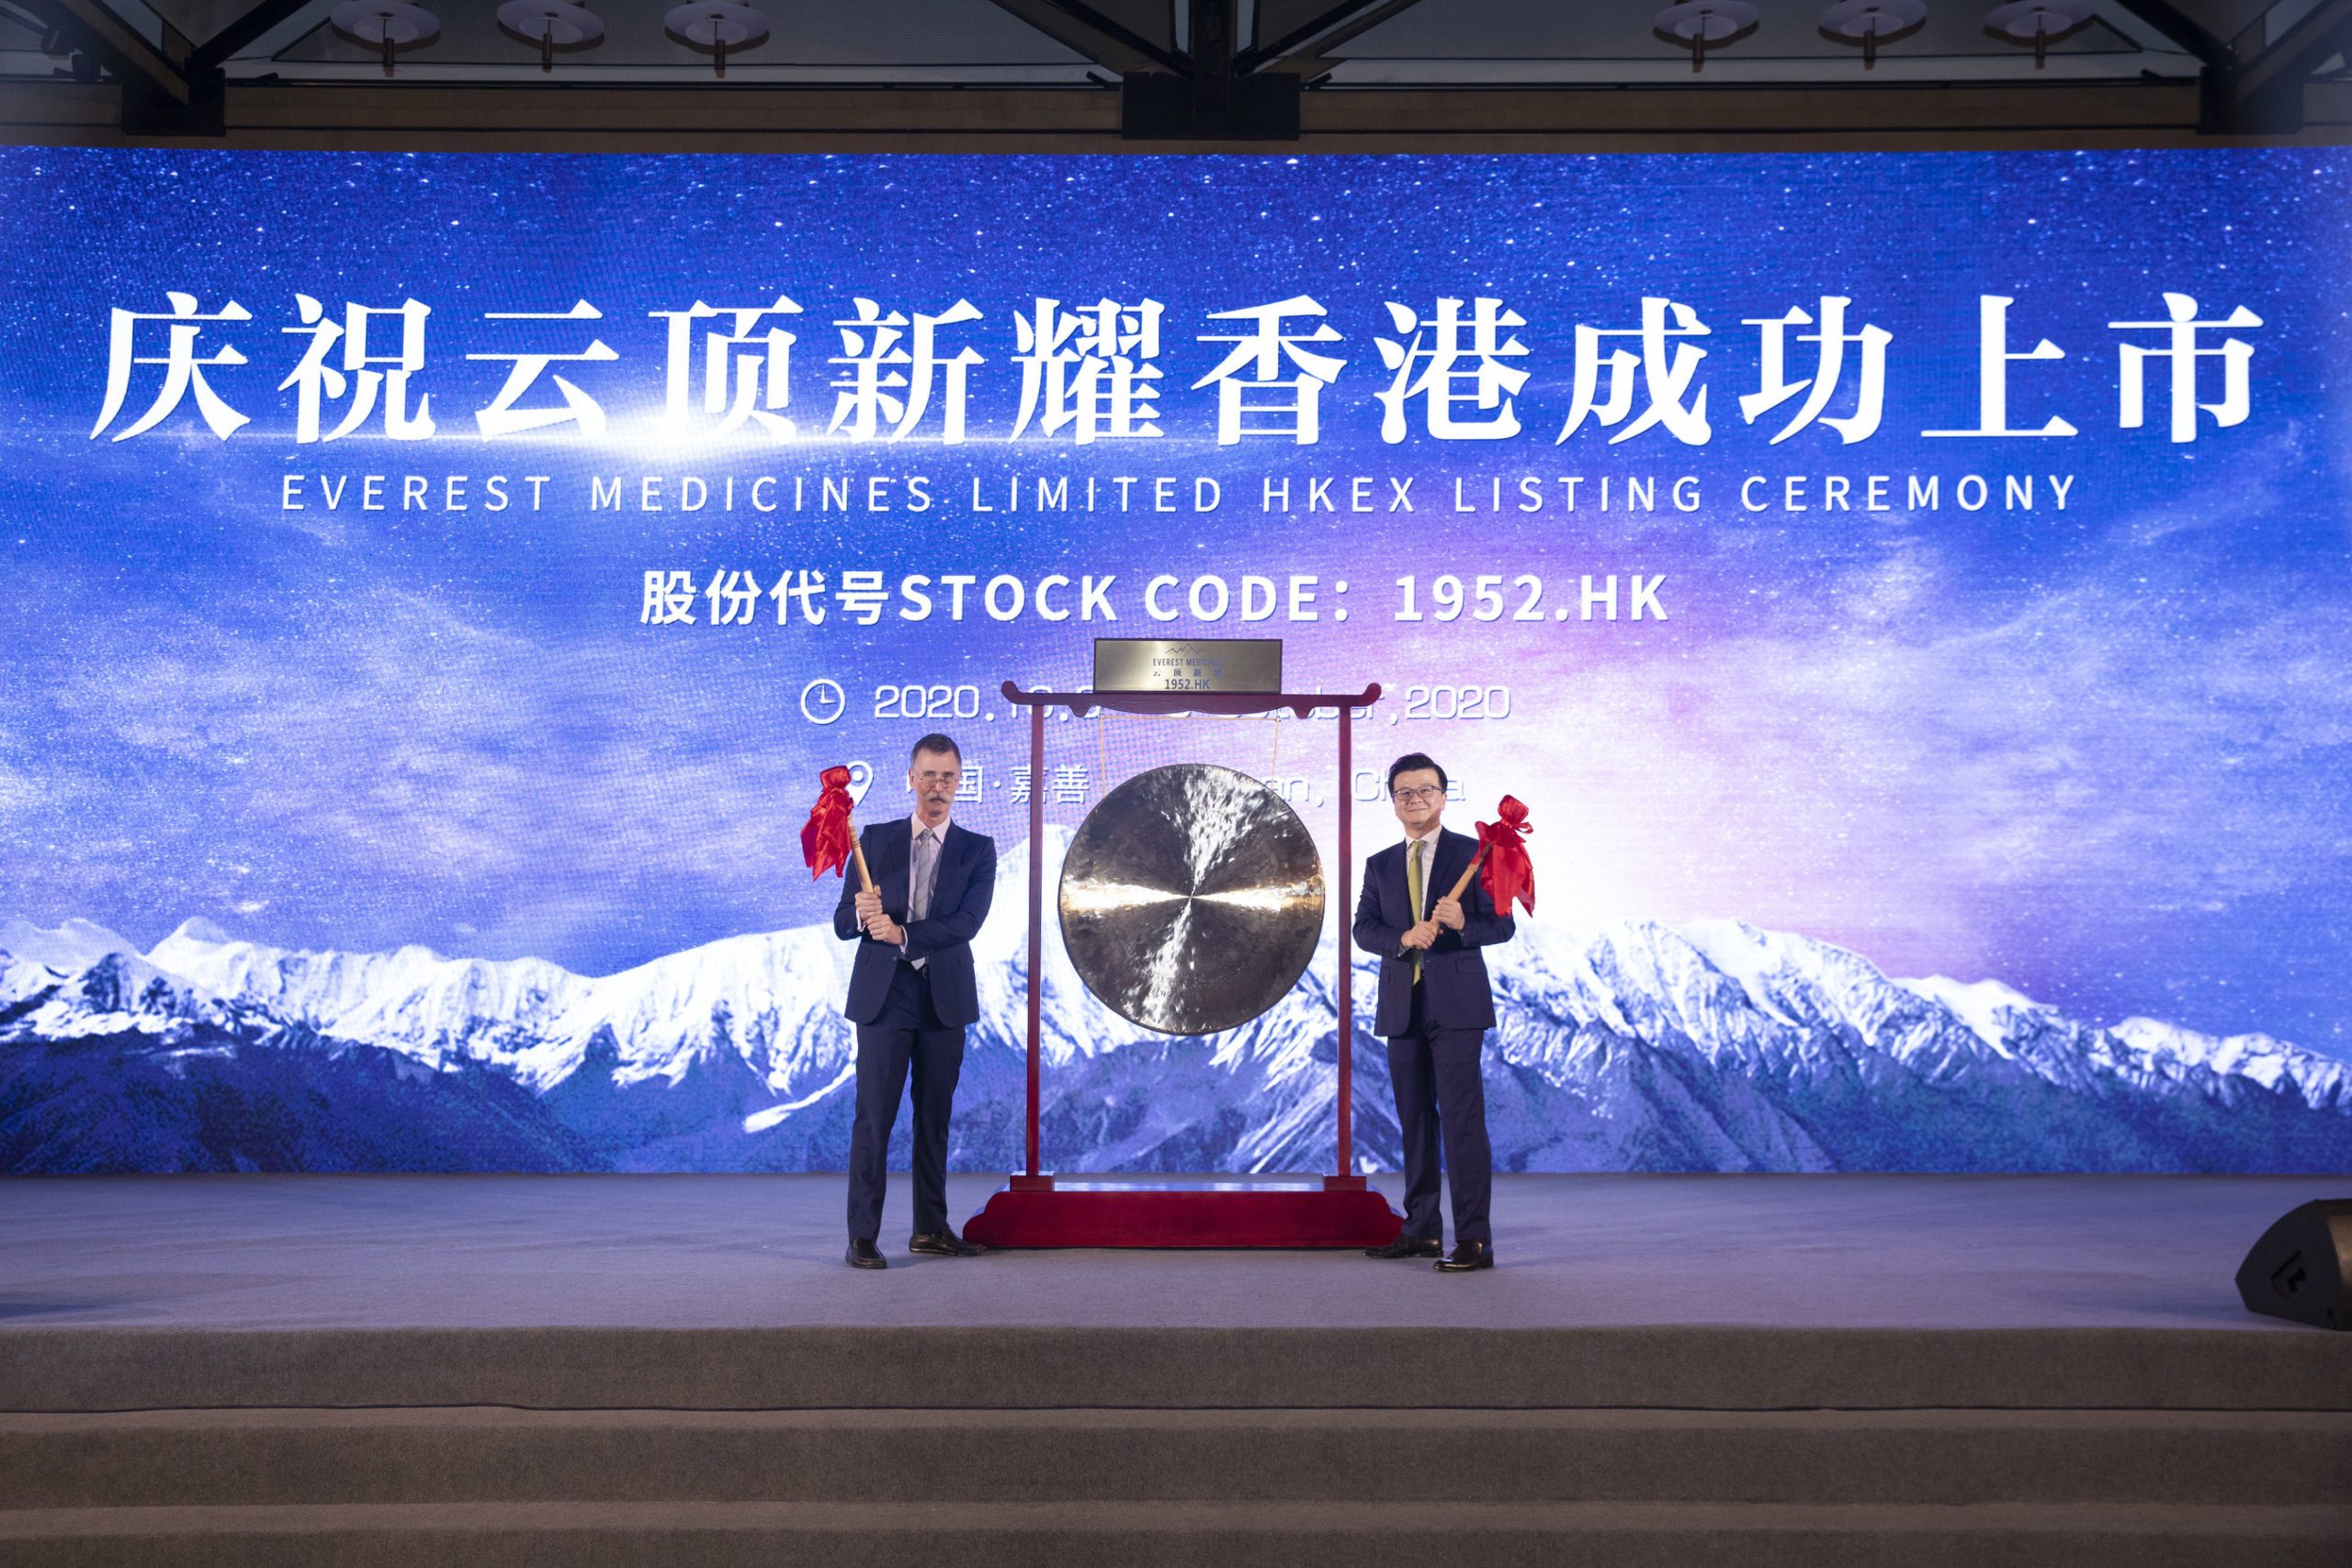 Chinese biopharma firm Everest Medicines raises $451m in HK IPO